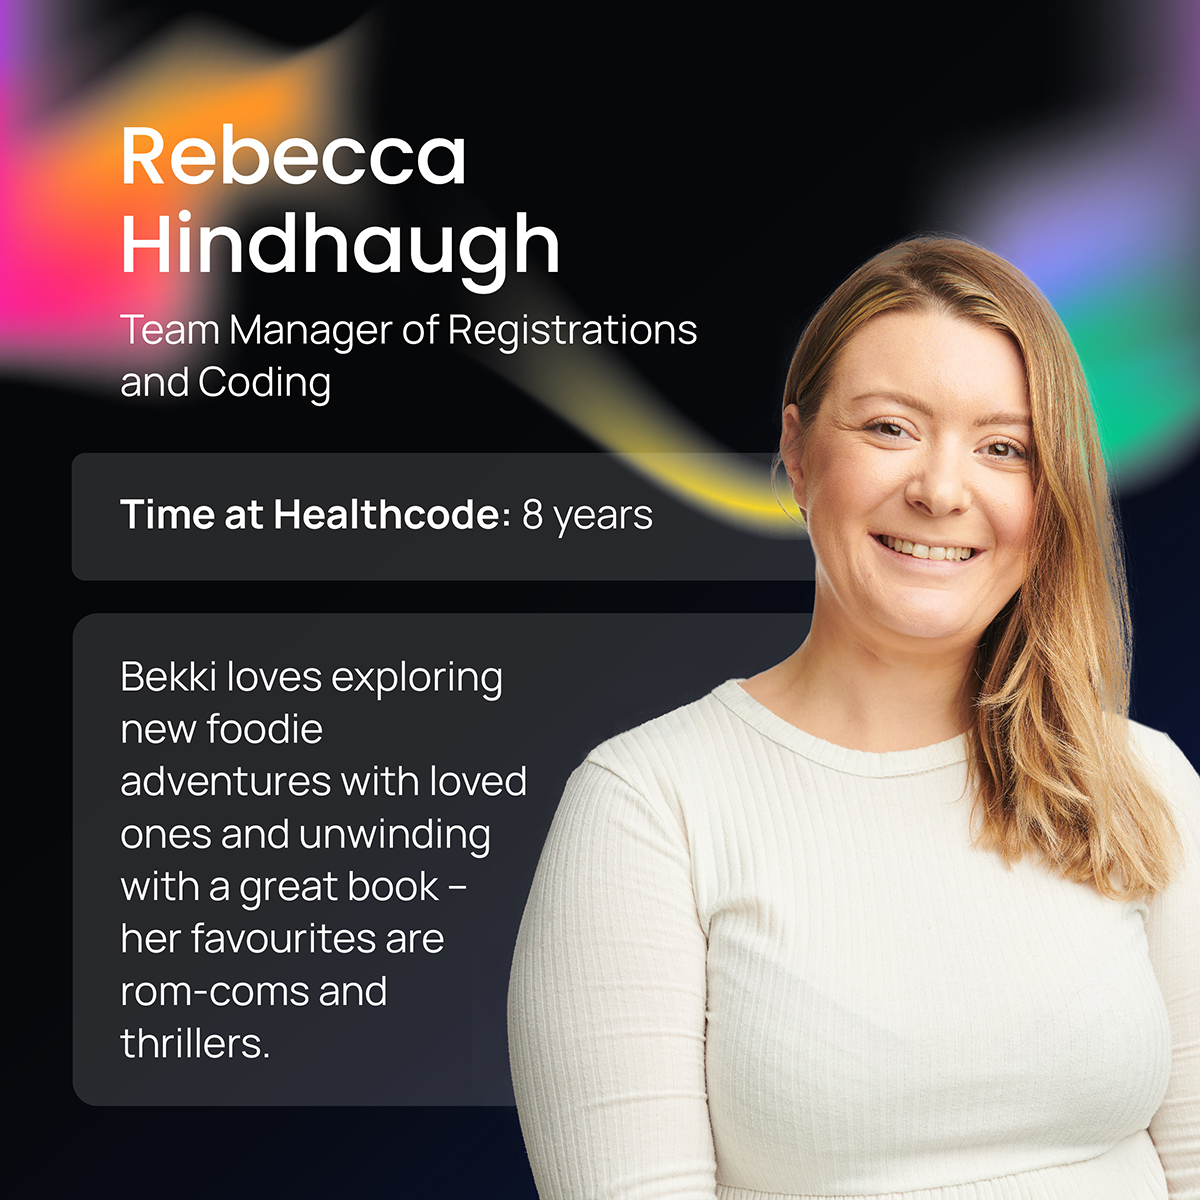 It's always good to put a face to a name. This month we're shining our #employeespotlight on Rebecca Hindhaugh, our Team Manager of Registrations and Coding. 

#Healthcode  #TeamManager #Registrations #Coding